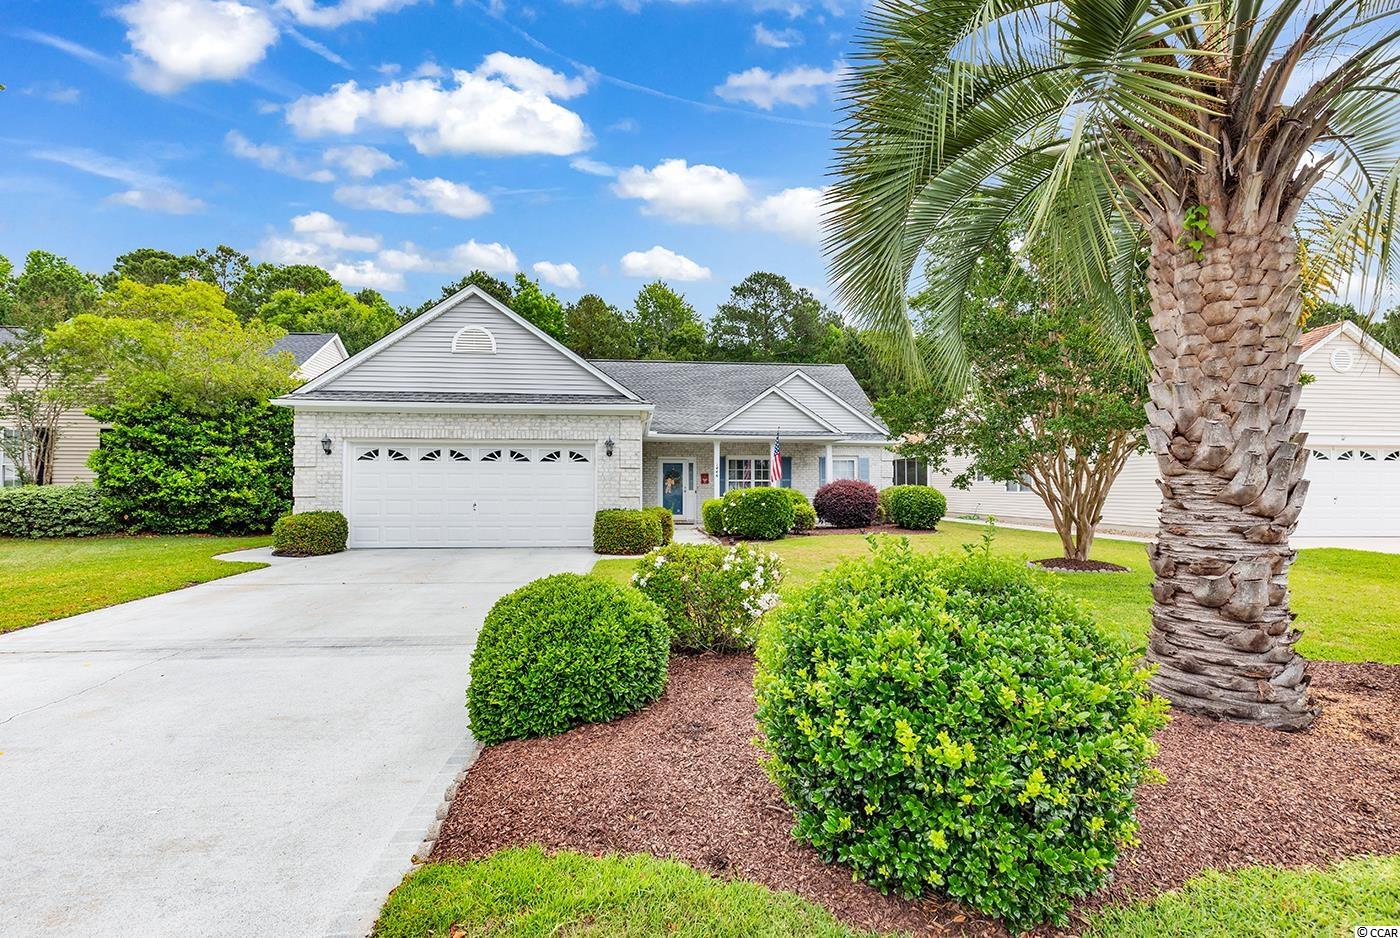 1446 Winged Foot Ct. Murrells Inlet, SC 29576